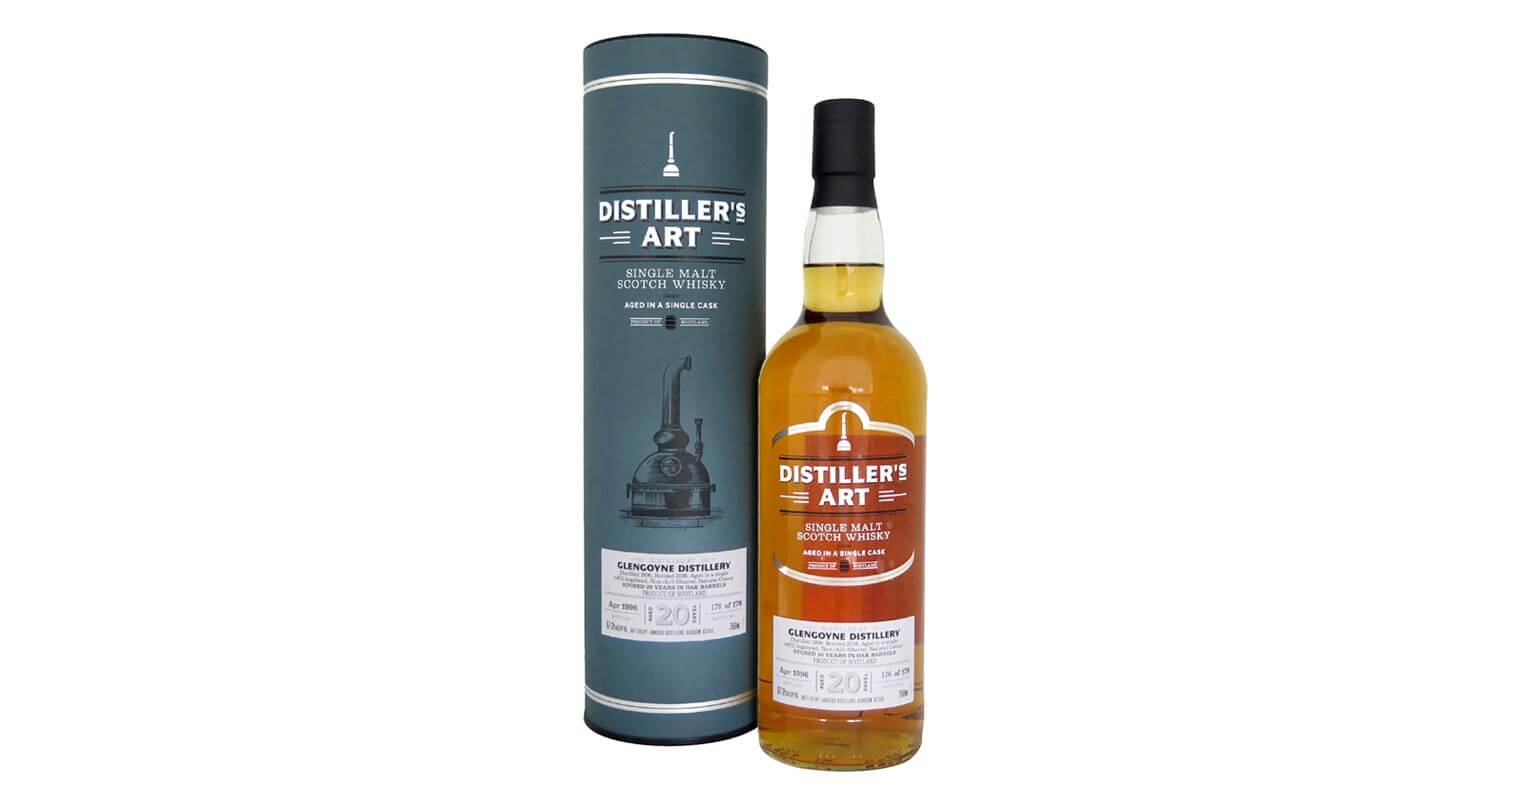 Extremely Limited Distiller's Art Collection Joins Preiss Imports, featured image